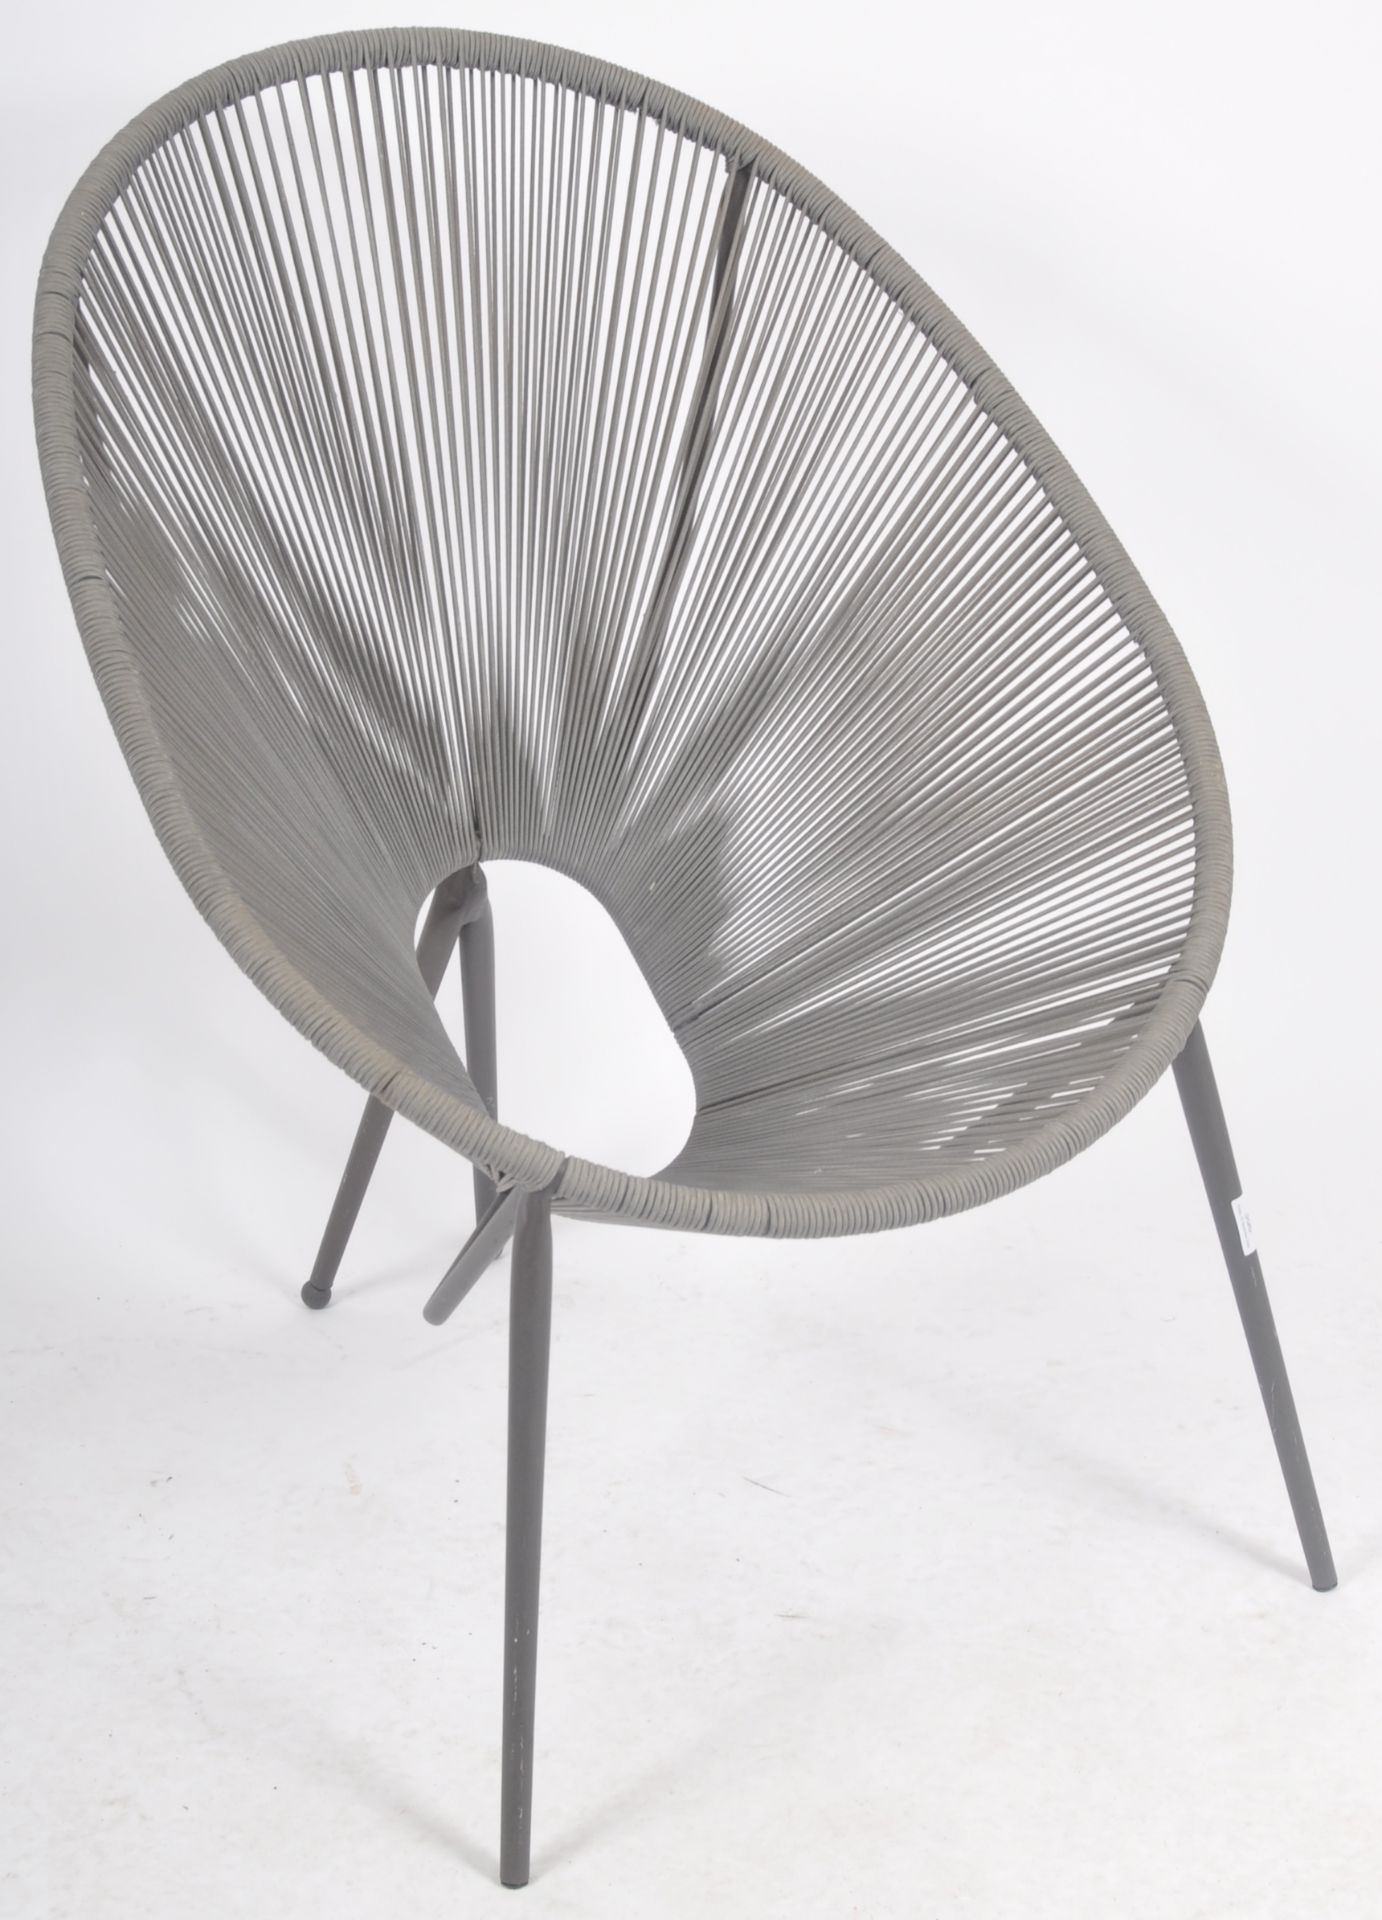 CONTEMPORARY DESIGNER EGG CHAIR / LOUNGE CHAIR - Image 2 of 7